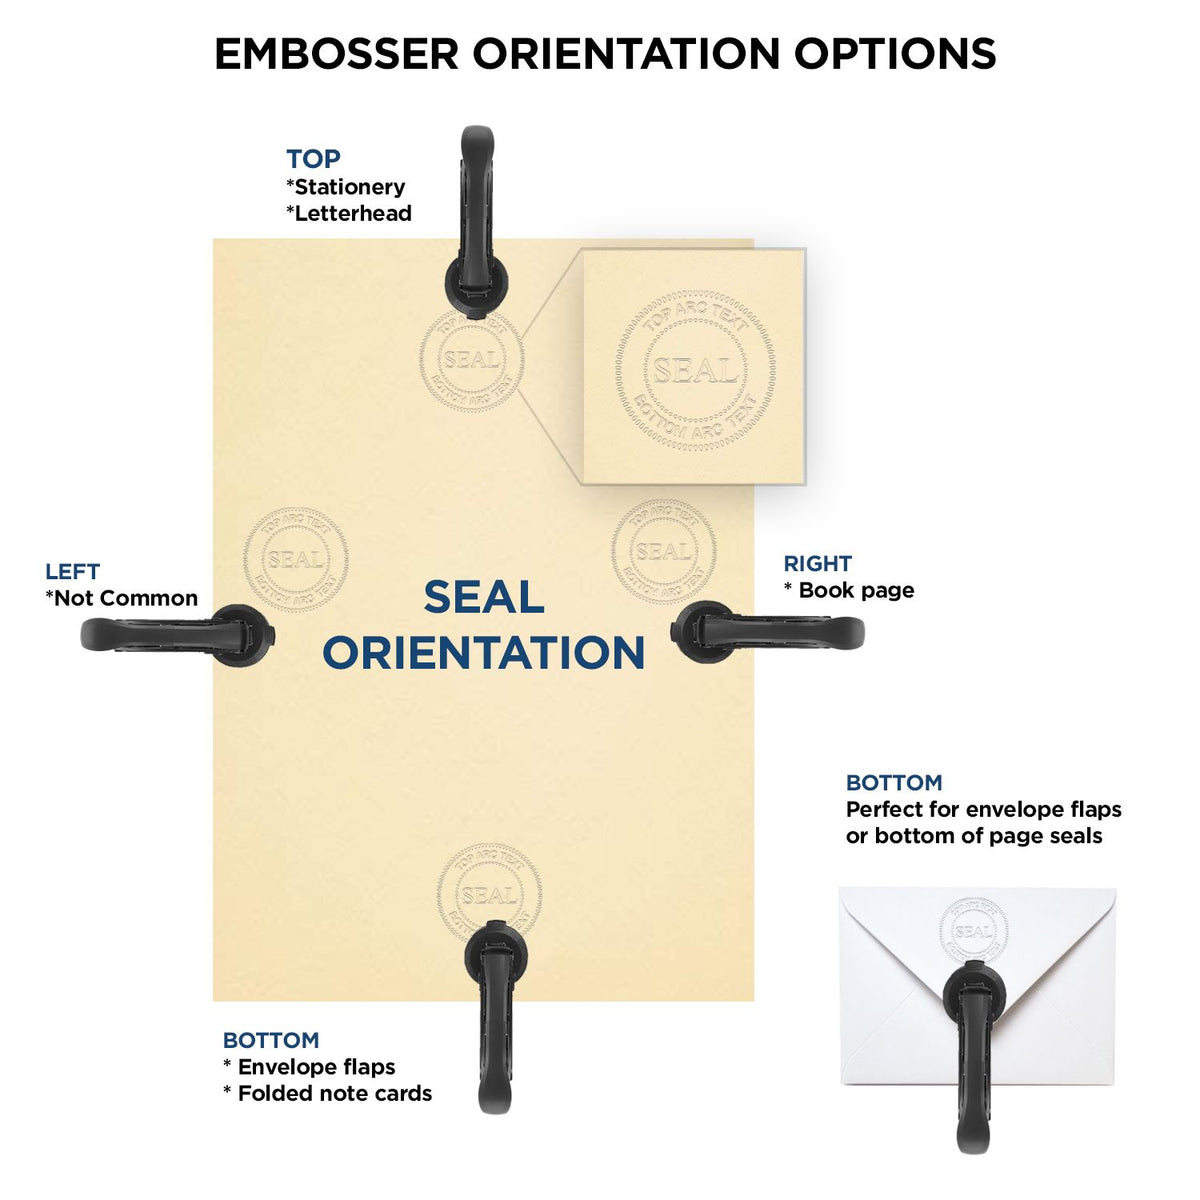 An infographic for the Hybrid North Carolina Land Surveyor Seal showing embosser orientation, this is showing examples of a top, bottom, right and left insert.